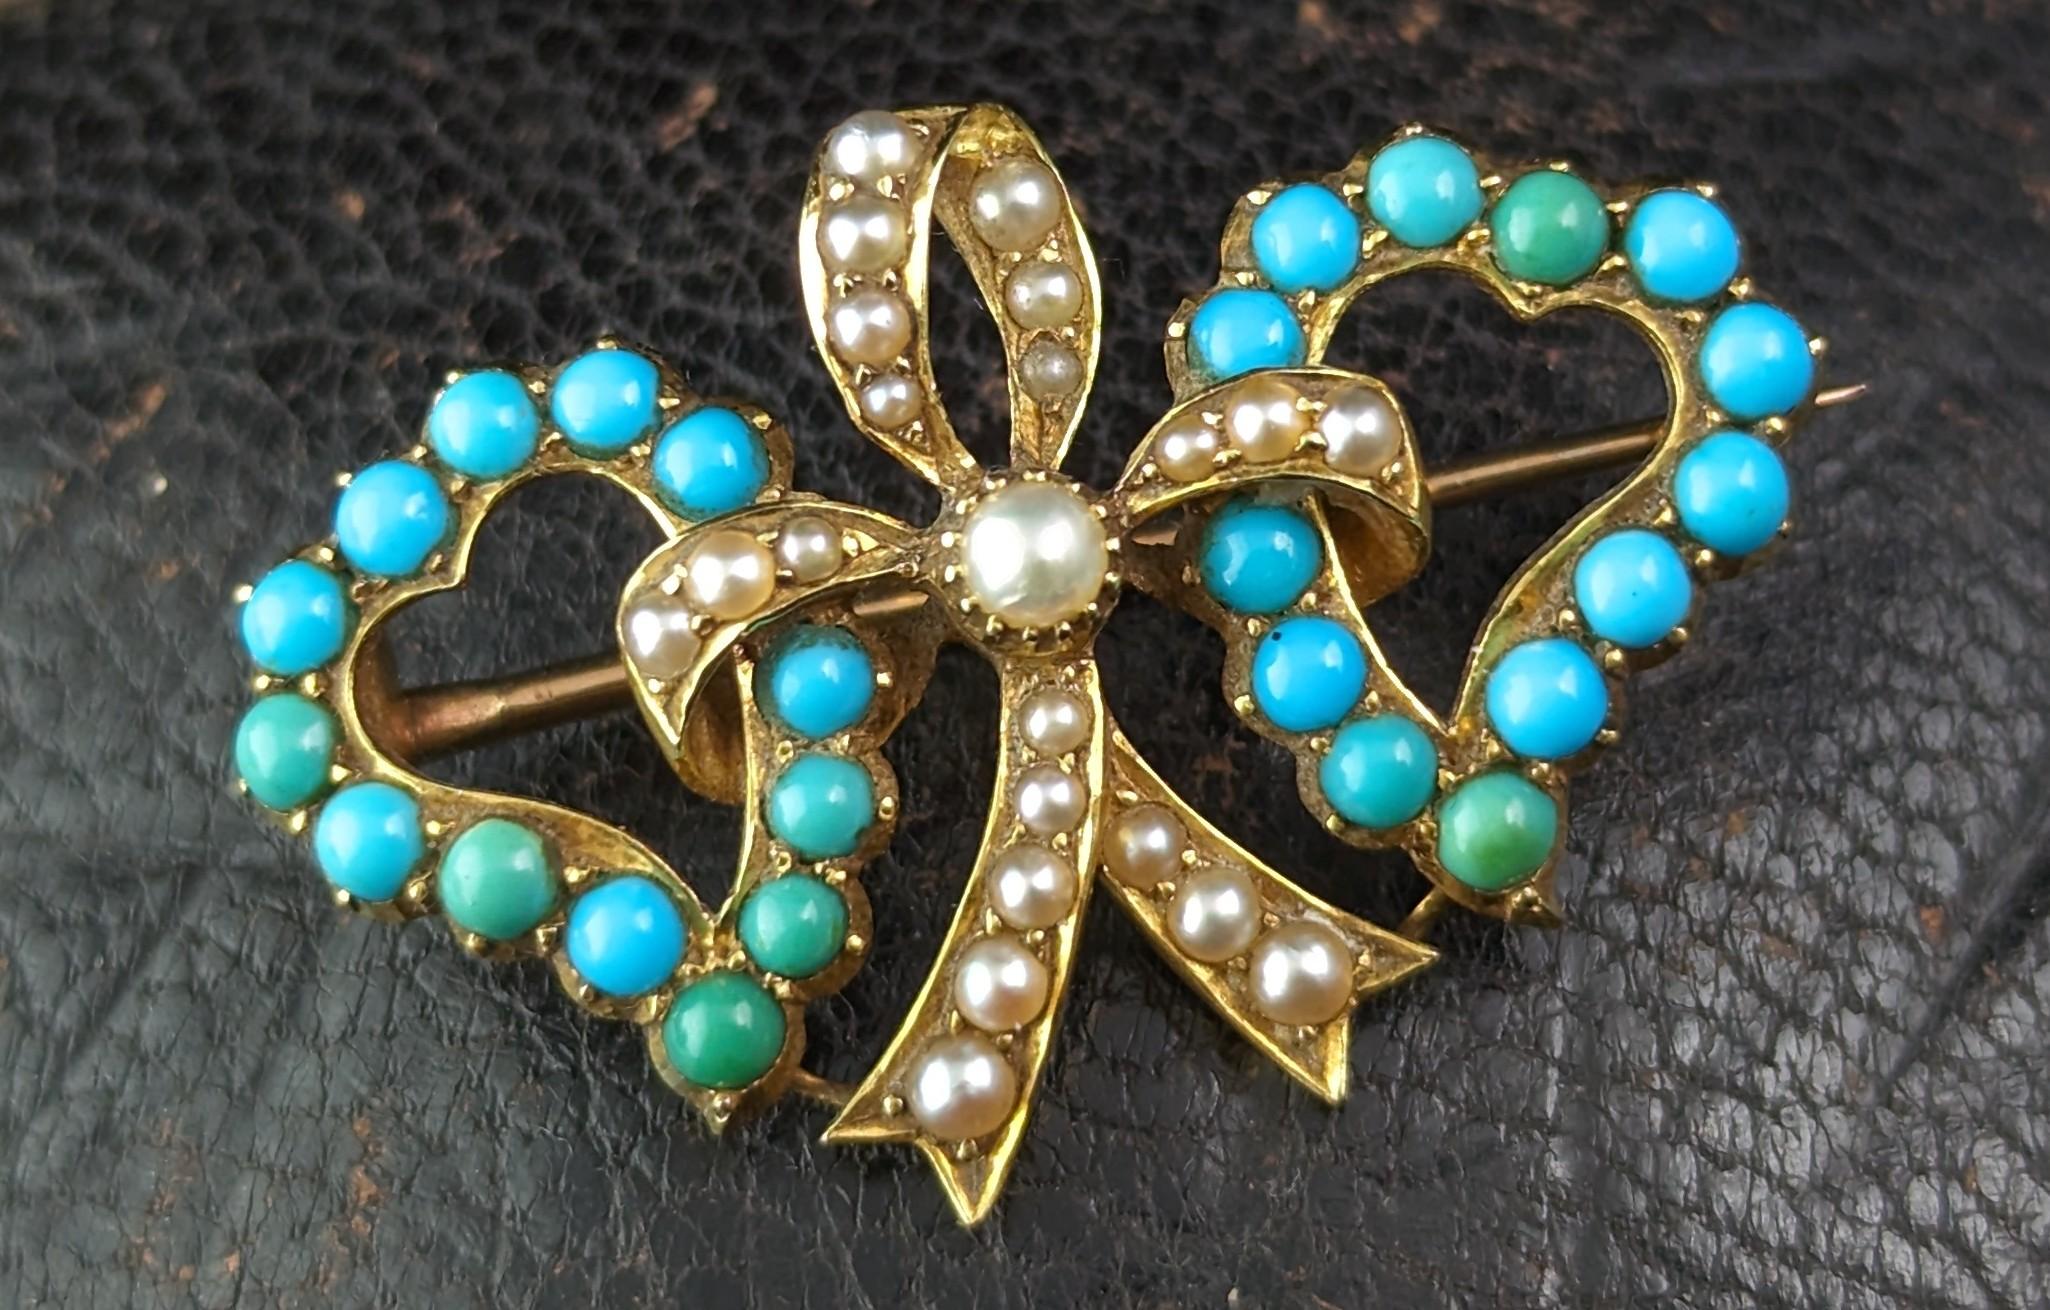 You can't help but be bewitched by this fine antique Victorian 'witches' heart brooch.

This gorgeous piece features double witches style hearts in rich 22ct yellow gold, each heart is adorned with lush vibrant turquoise cabochons in various